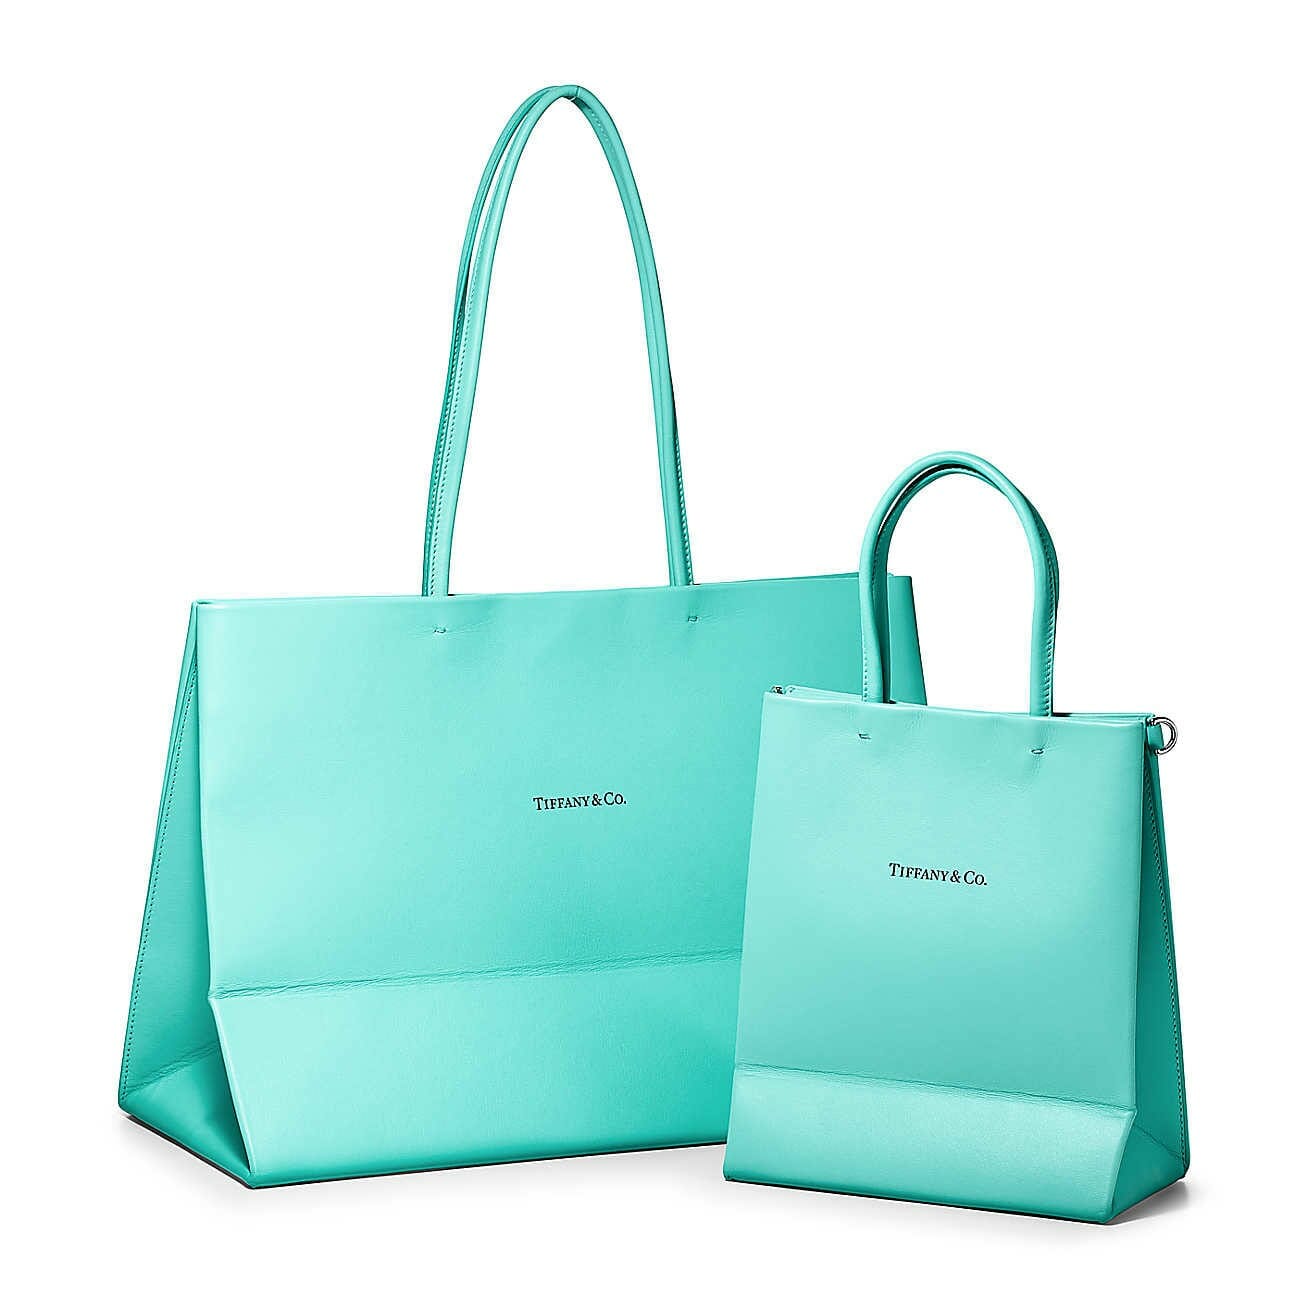 Mothers Day Gift ideas from Newport Living and Lifestyles Tiffany & Co. Large Shopping Tote in Tiffany Blue® Leather $1350